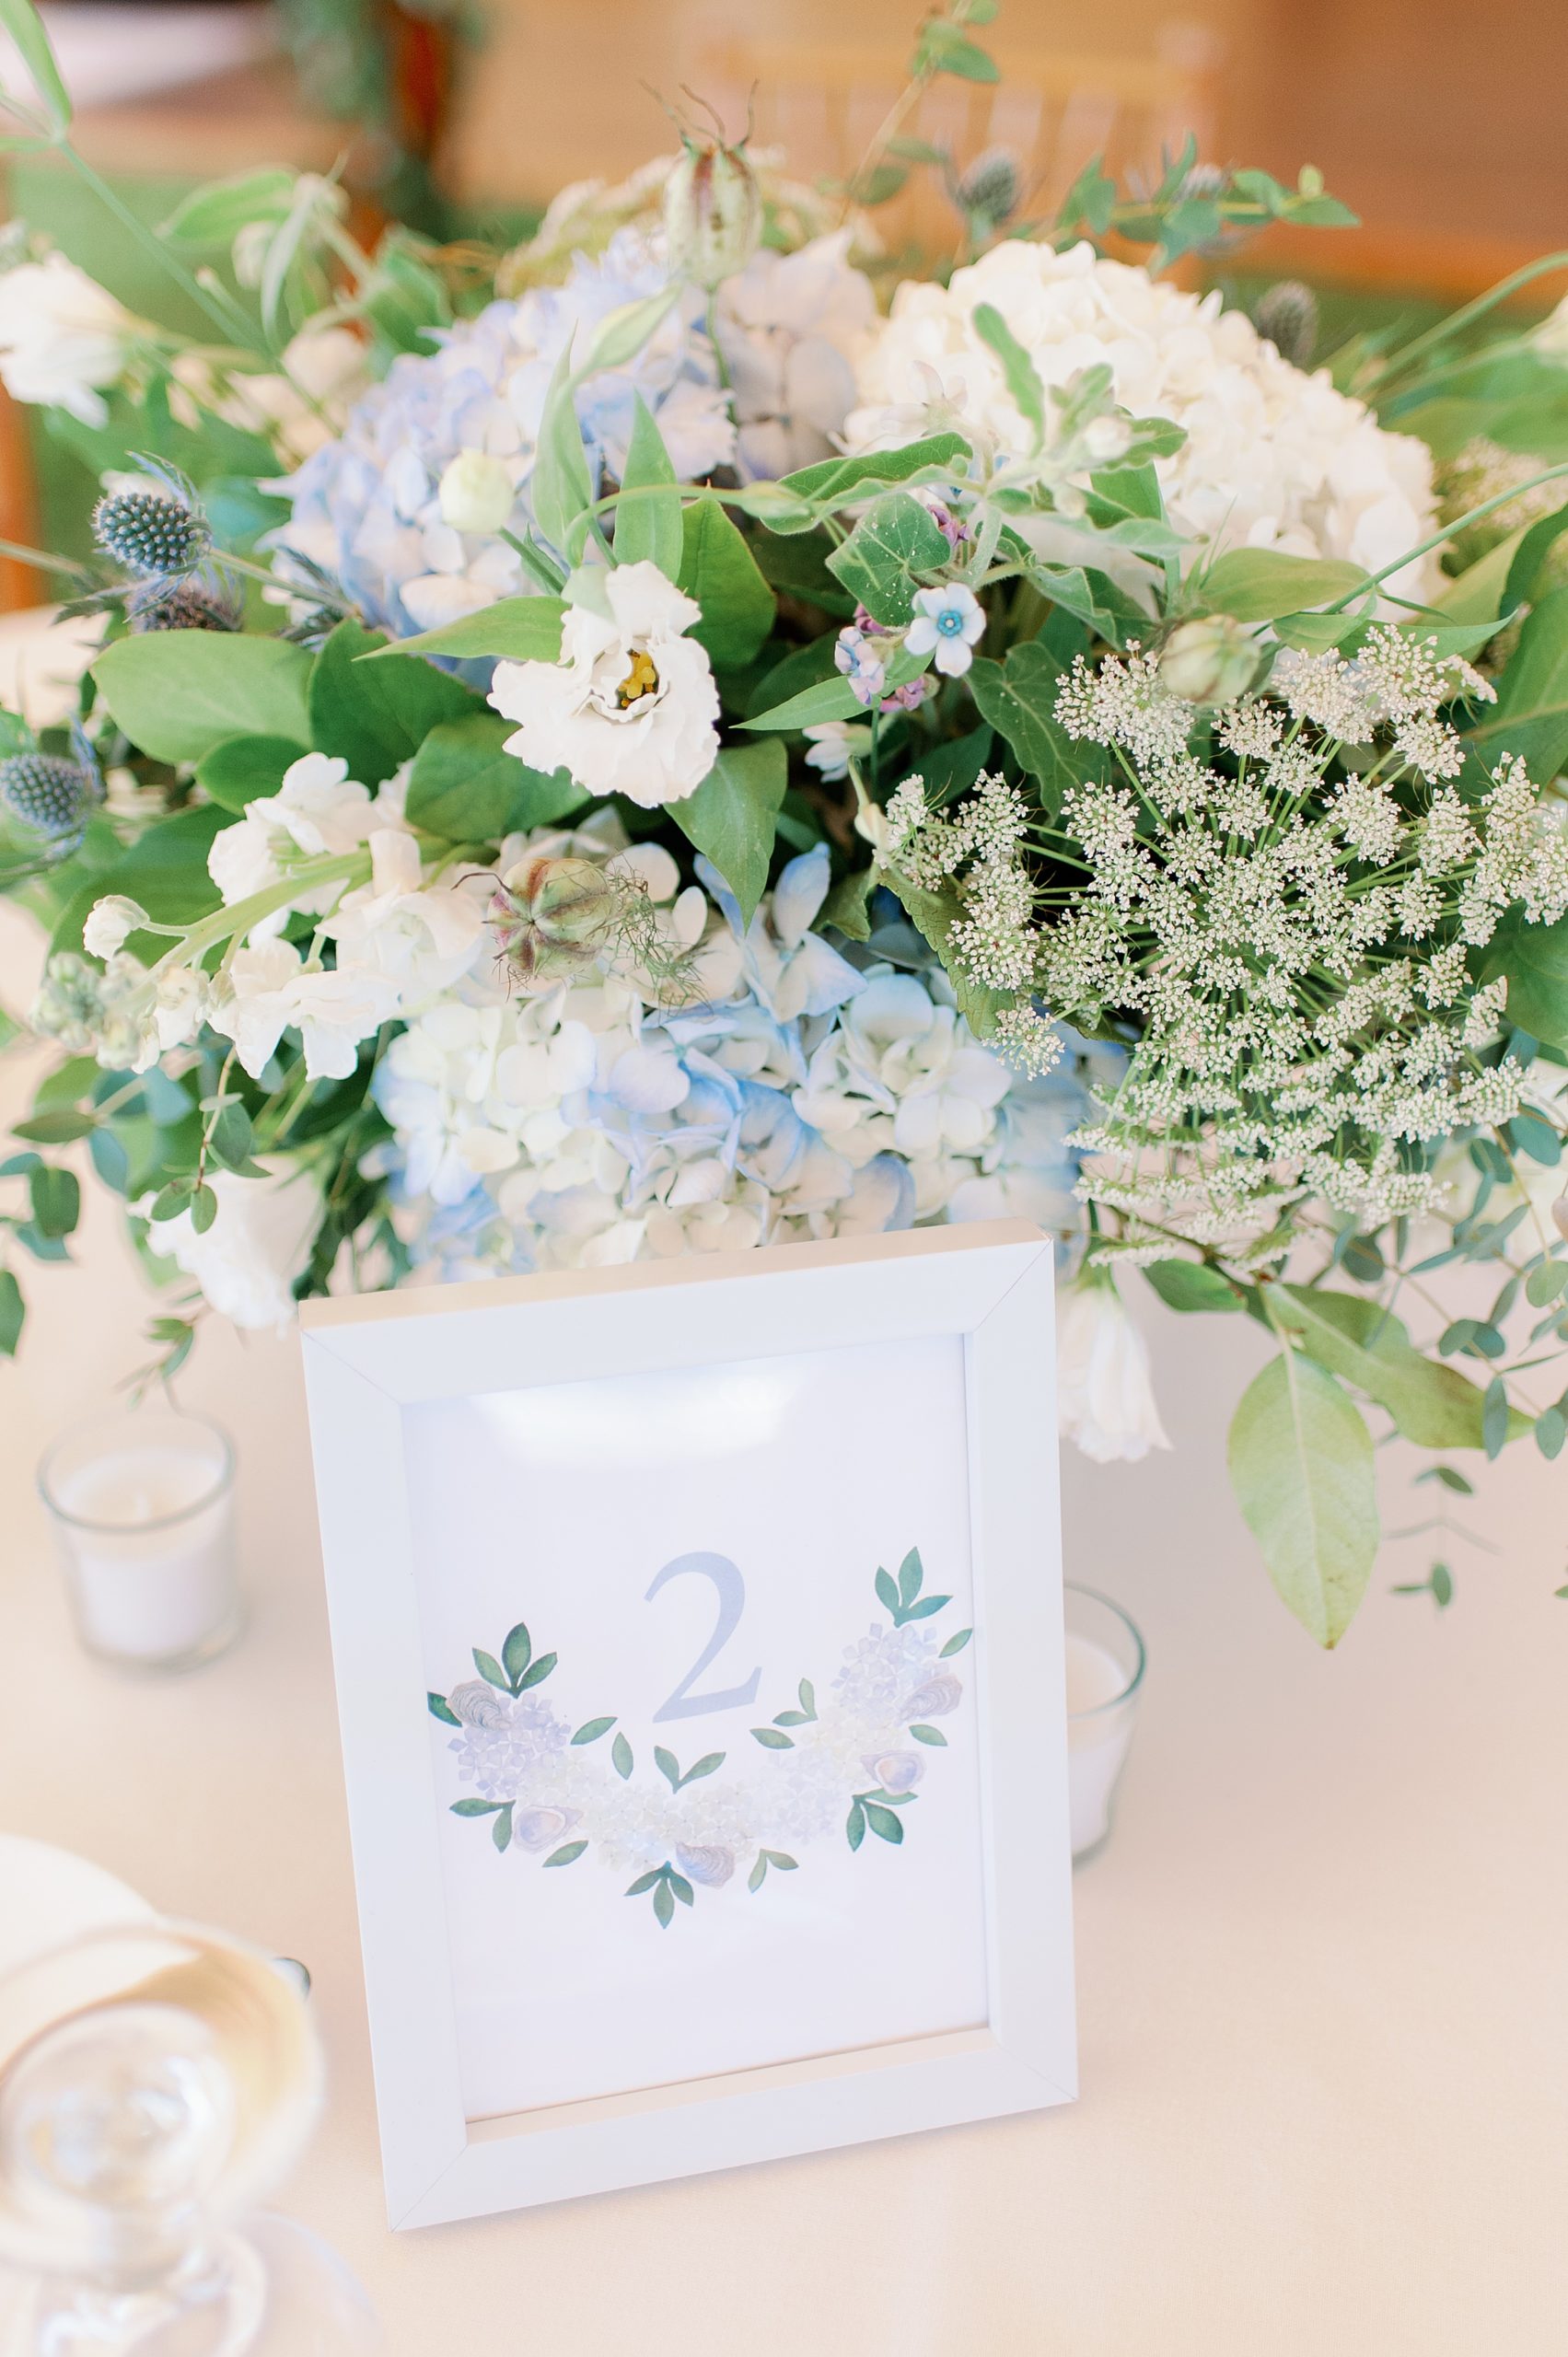 watercolor table numbers and floral centerpieces for tented new england wedding